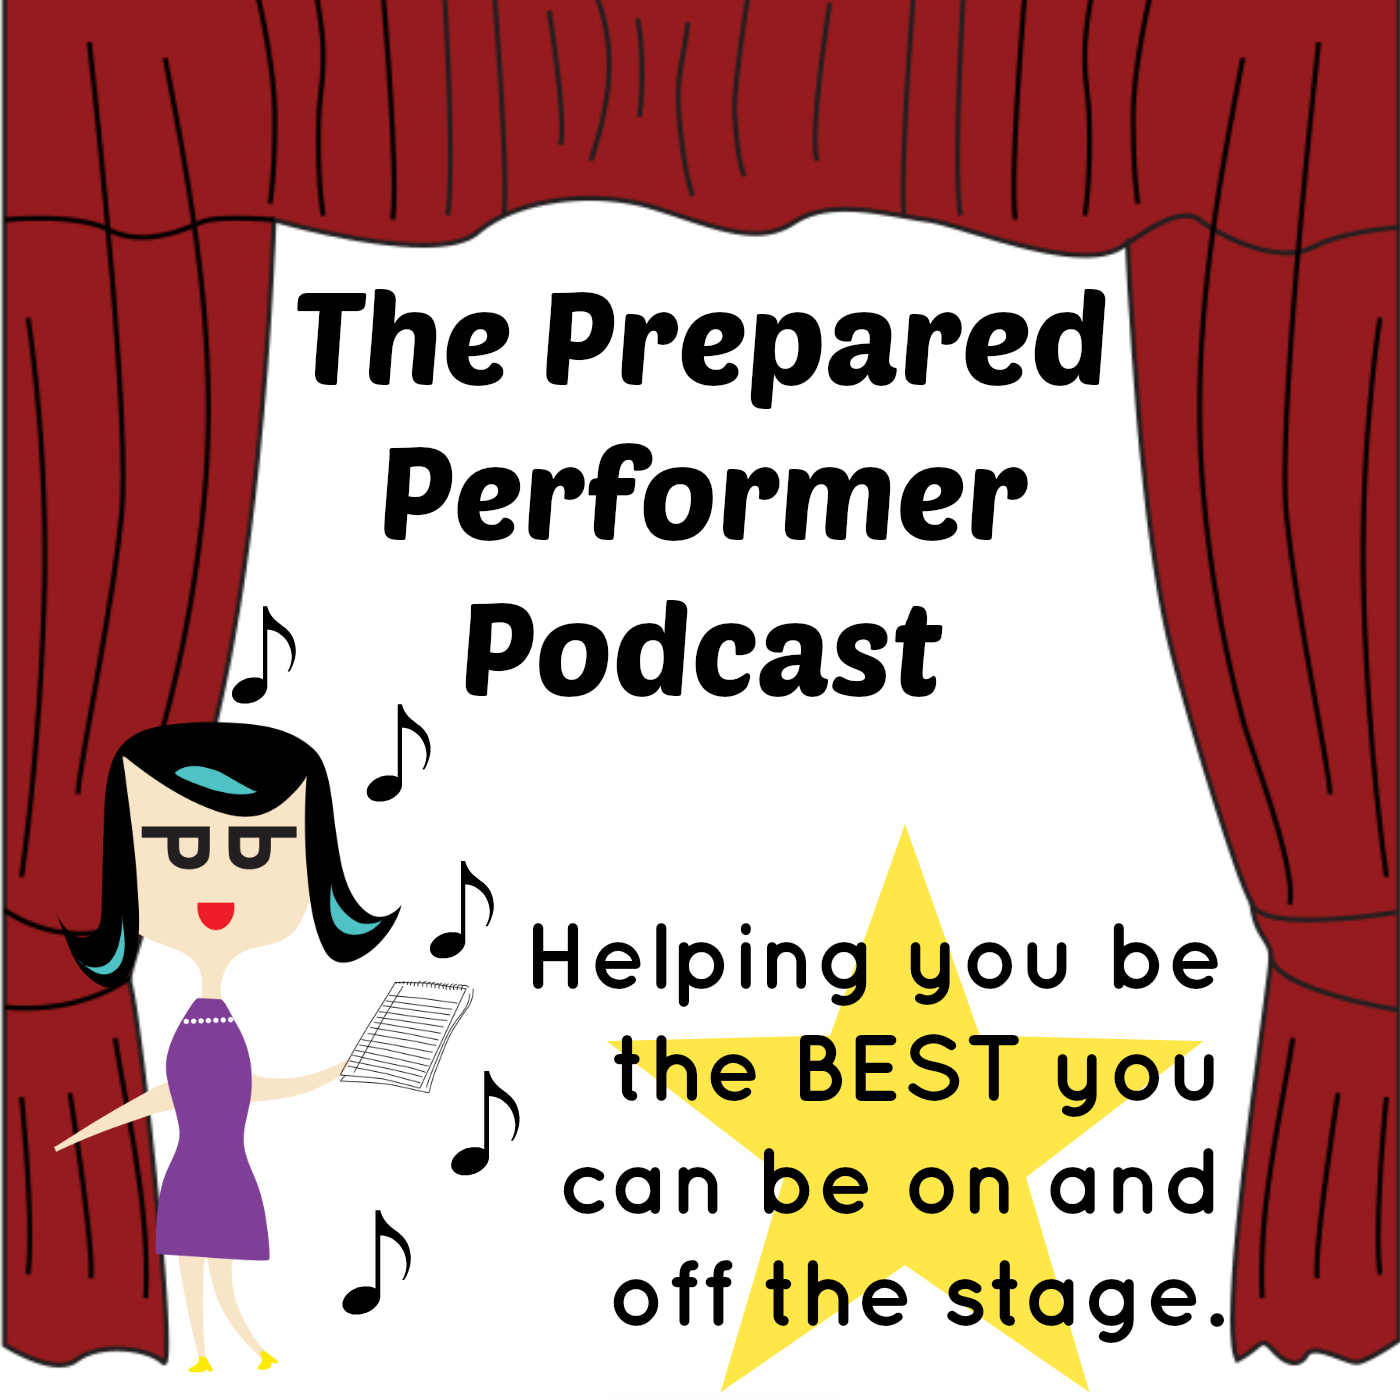 The Prepared Performer Podcast